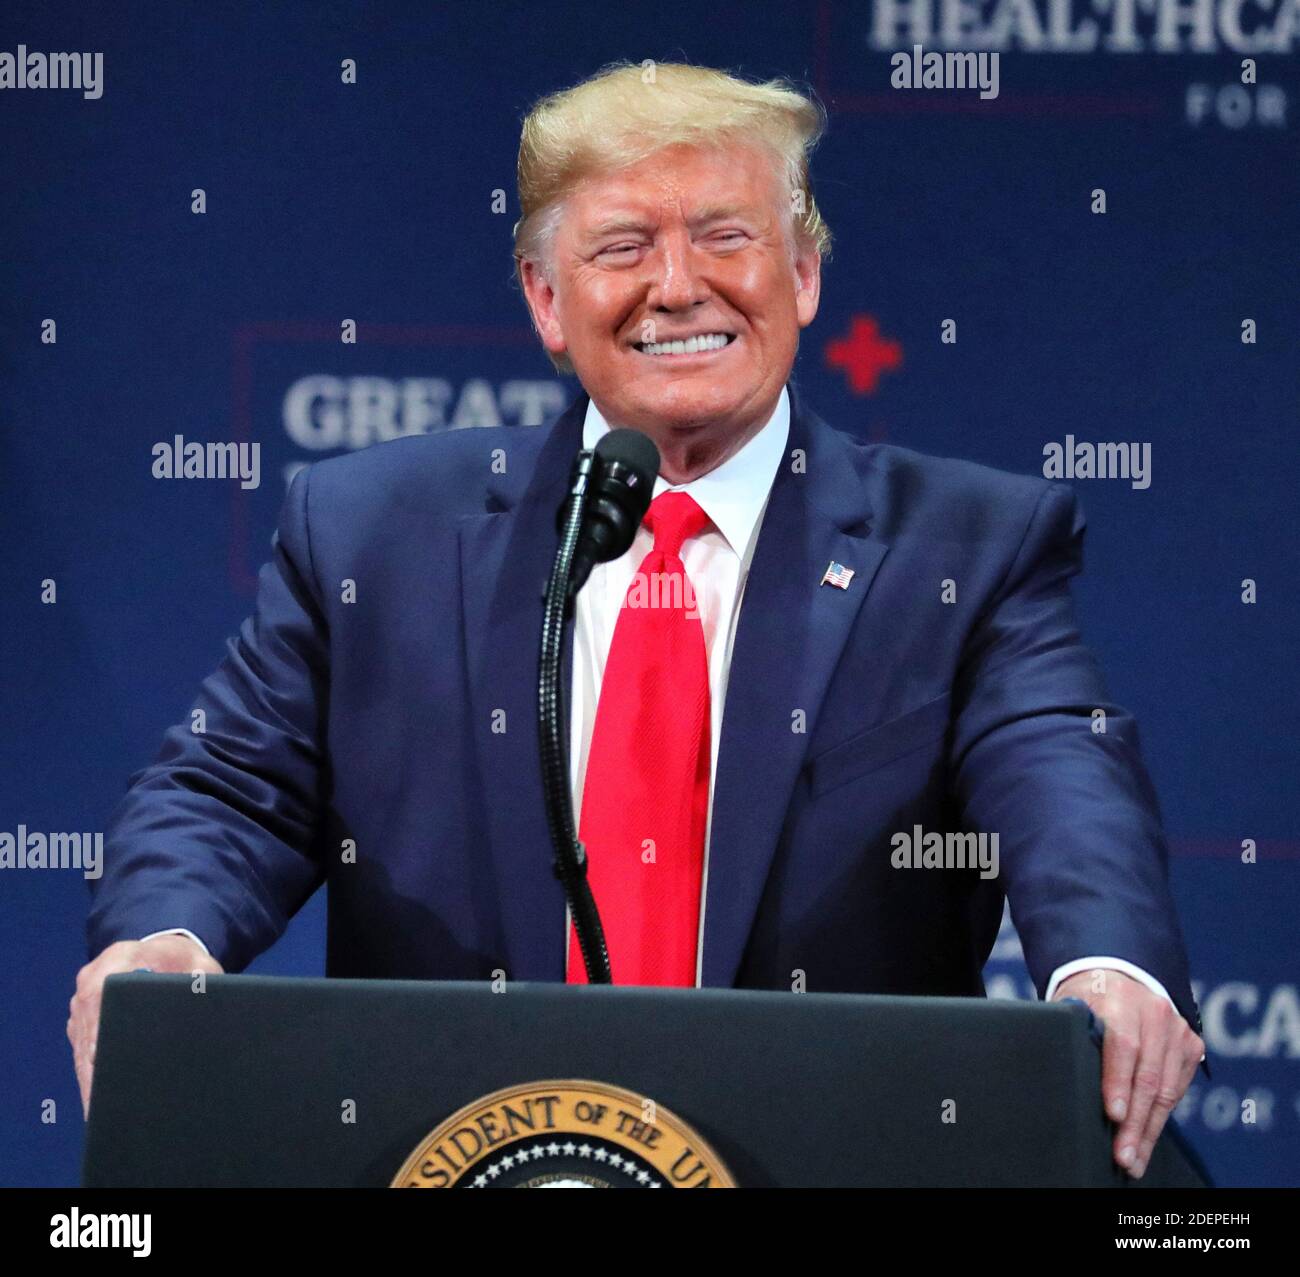 NO FILM, NO VIDEO, NO TV, NO DOCUMENTARY - President Donald Trump responds to cheering supporters during his appearance at the Sharon L. Morris Performing Arts Center in The Villages, Fla., Thursday, October 3, 2019. Photo by Joe Burbank/Orlando Sentinel/TNS/ABACAPRESS.COM Stock Photo